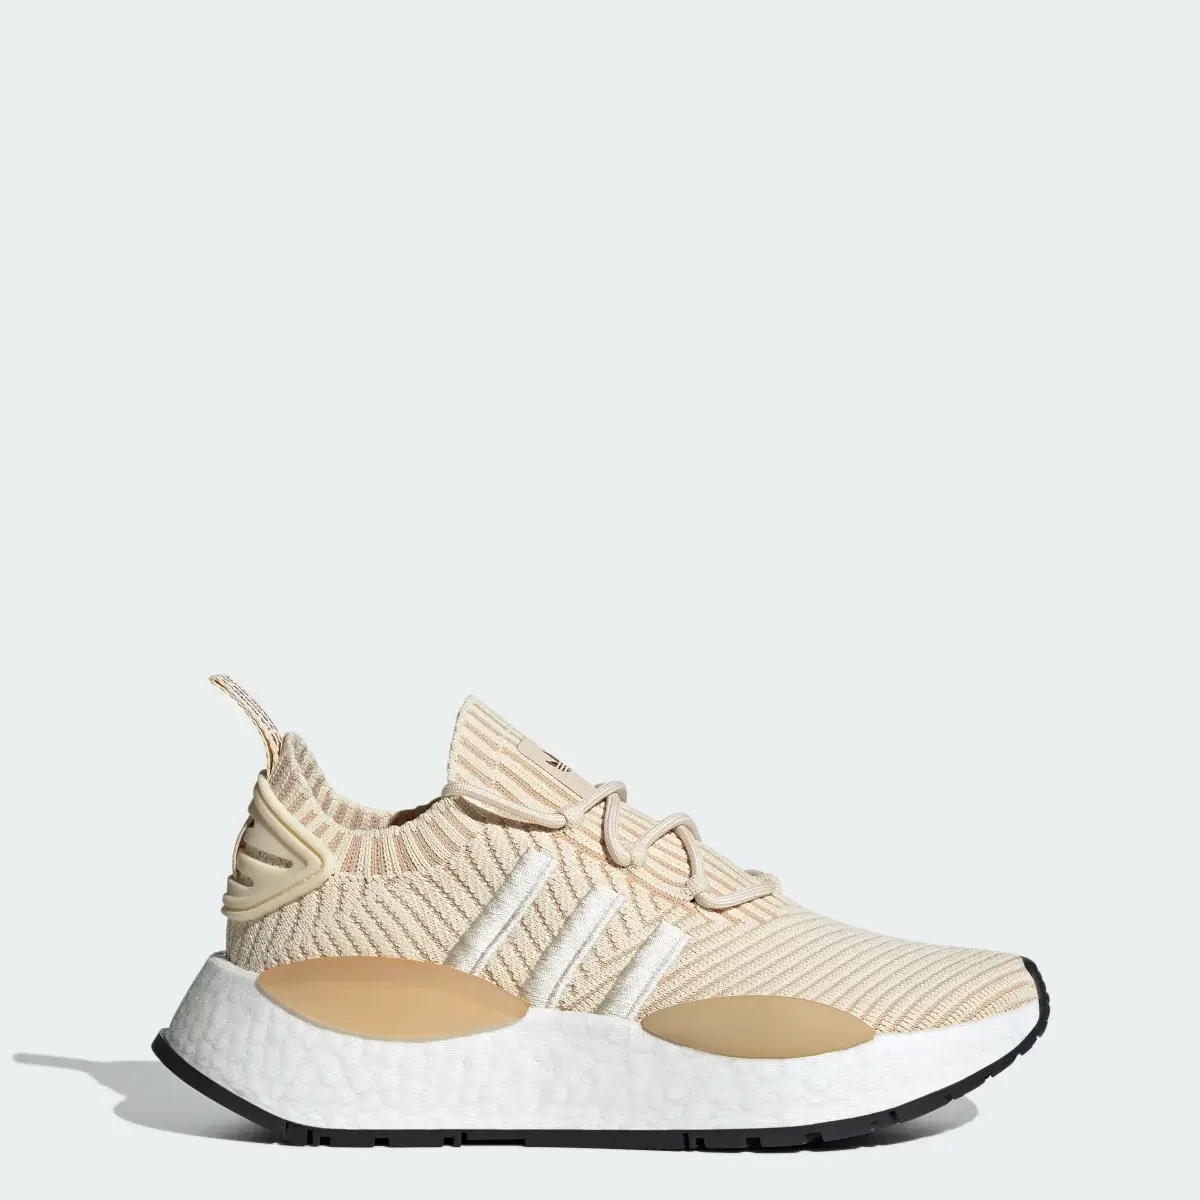 Adidas NMD_W1 Shoes. 1